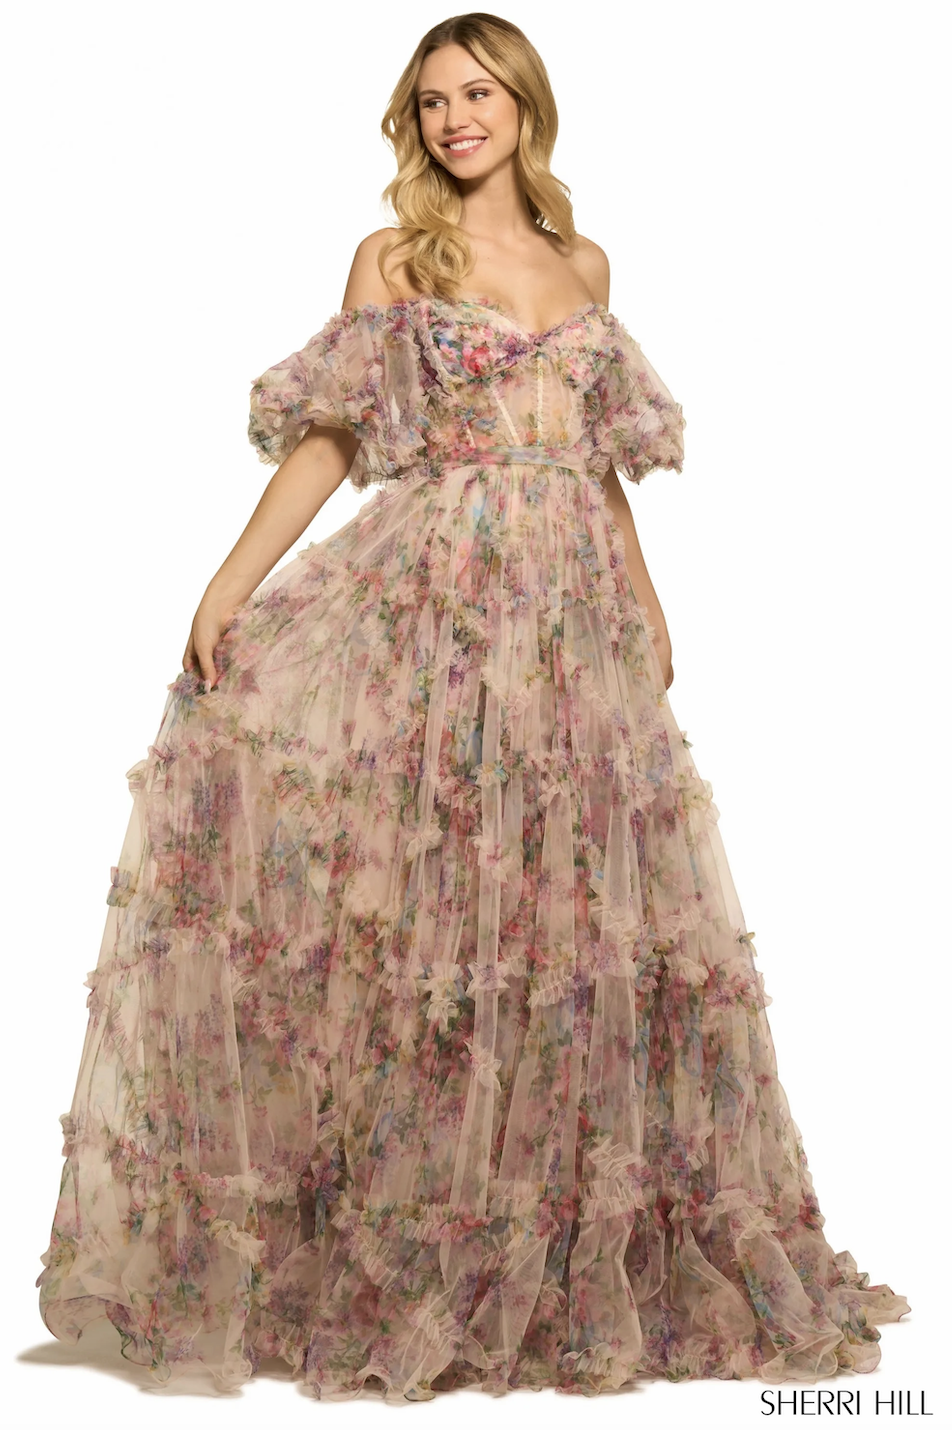 Flirty Floral Prom Dresses Inspired by Spring Image